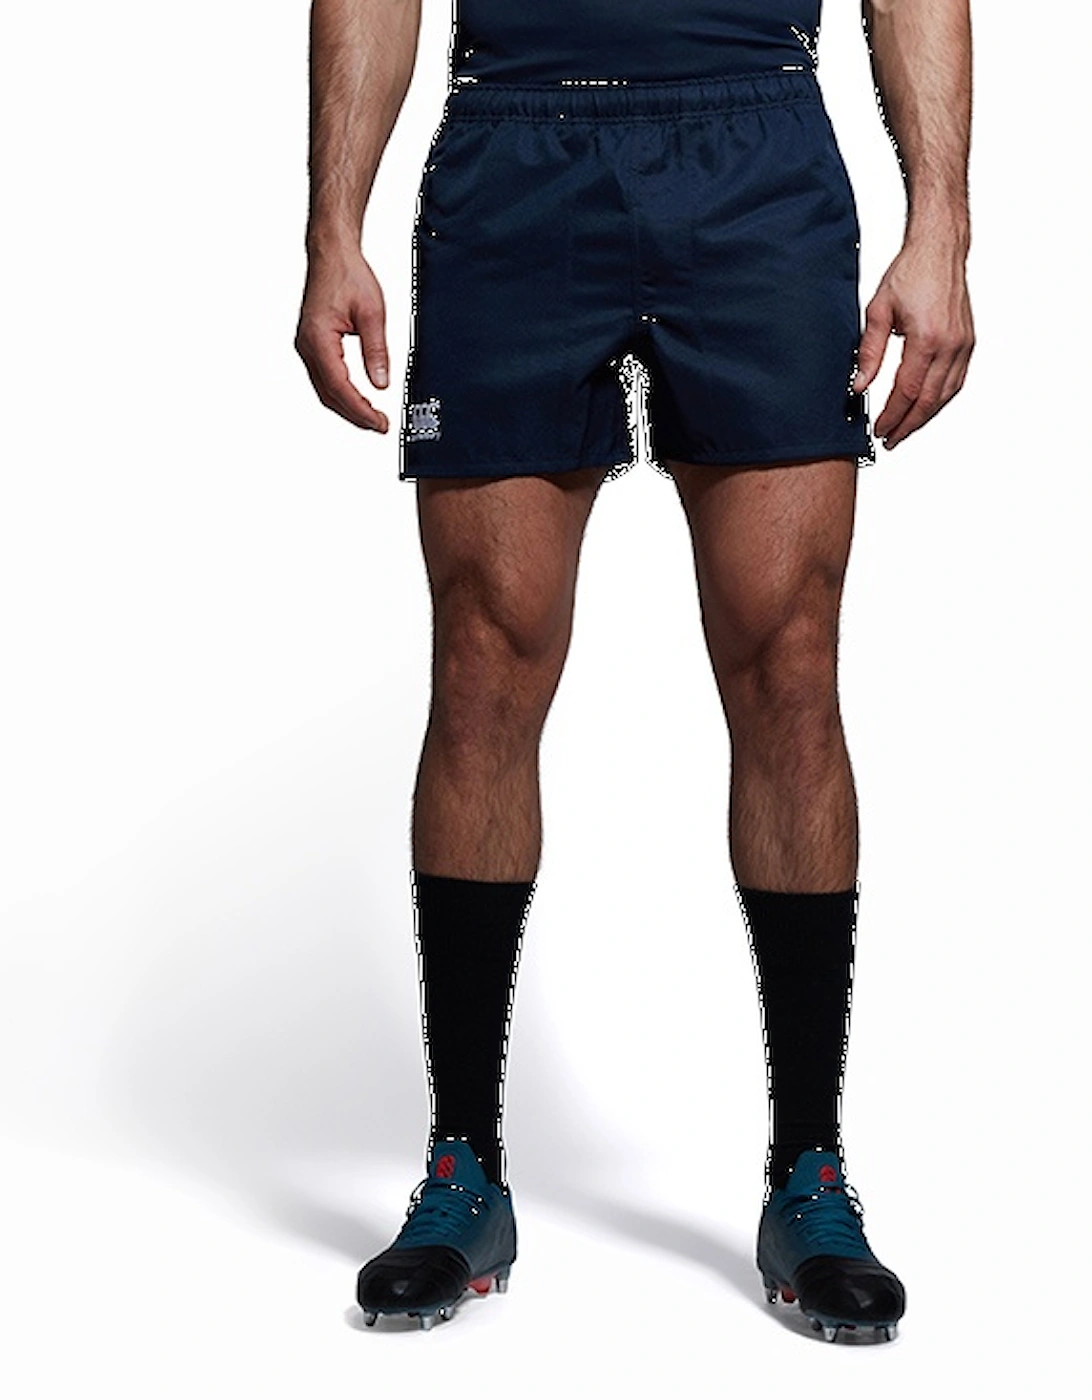 Canterbury Professional Polyester Rugby Short | Men's |  | M